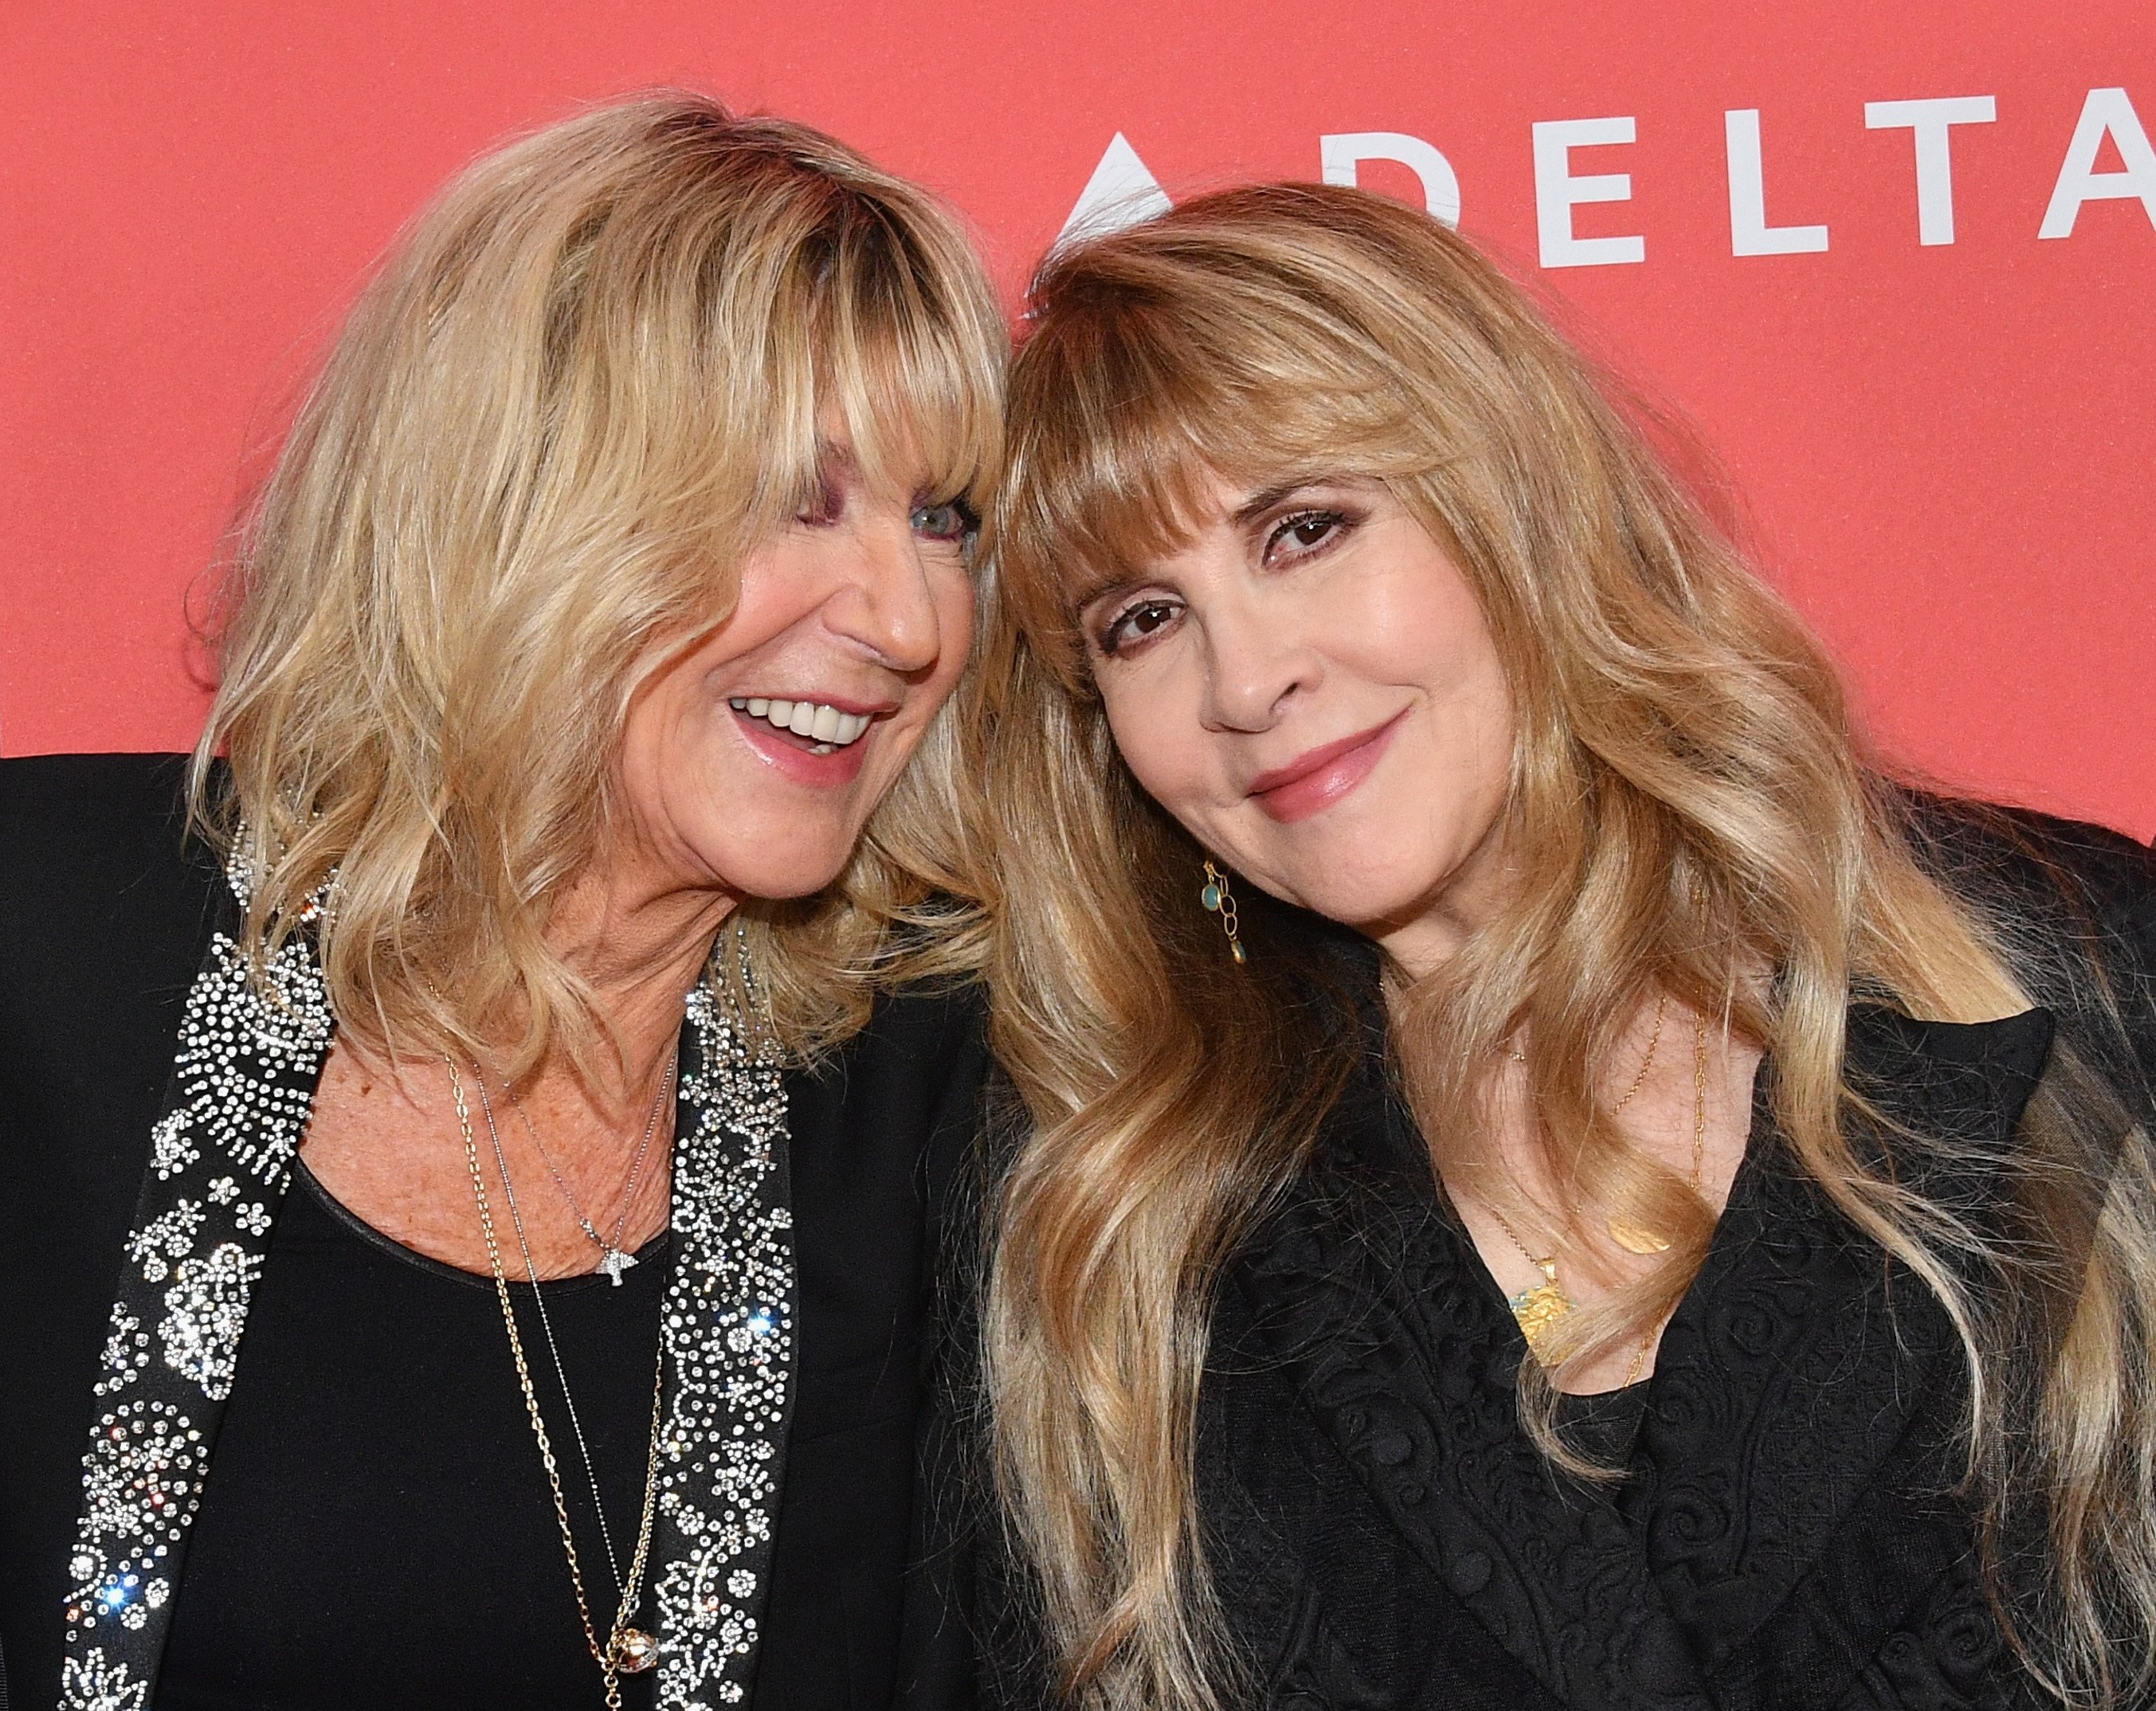 Christine McVie and Stevie Nicks both wear black and stand against a red background.